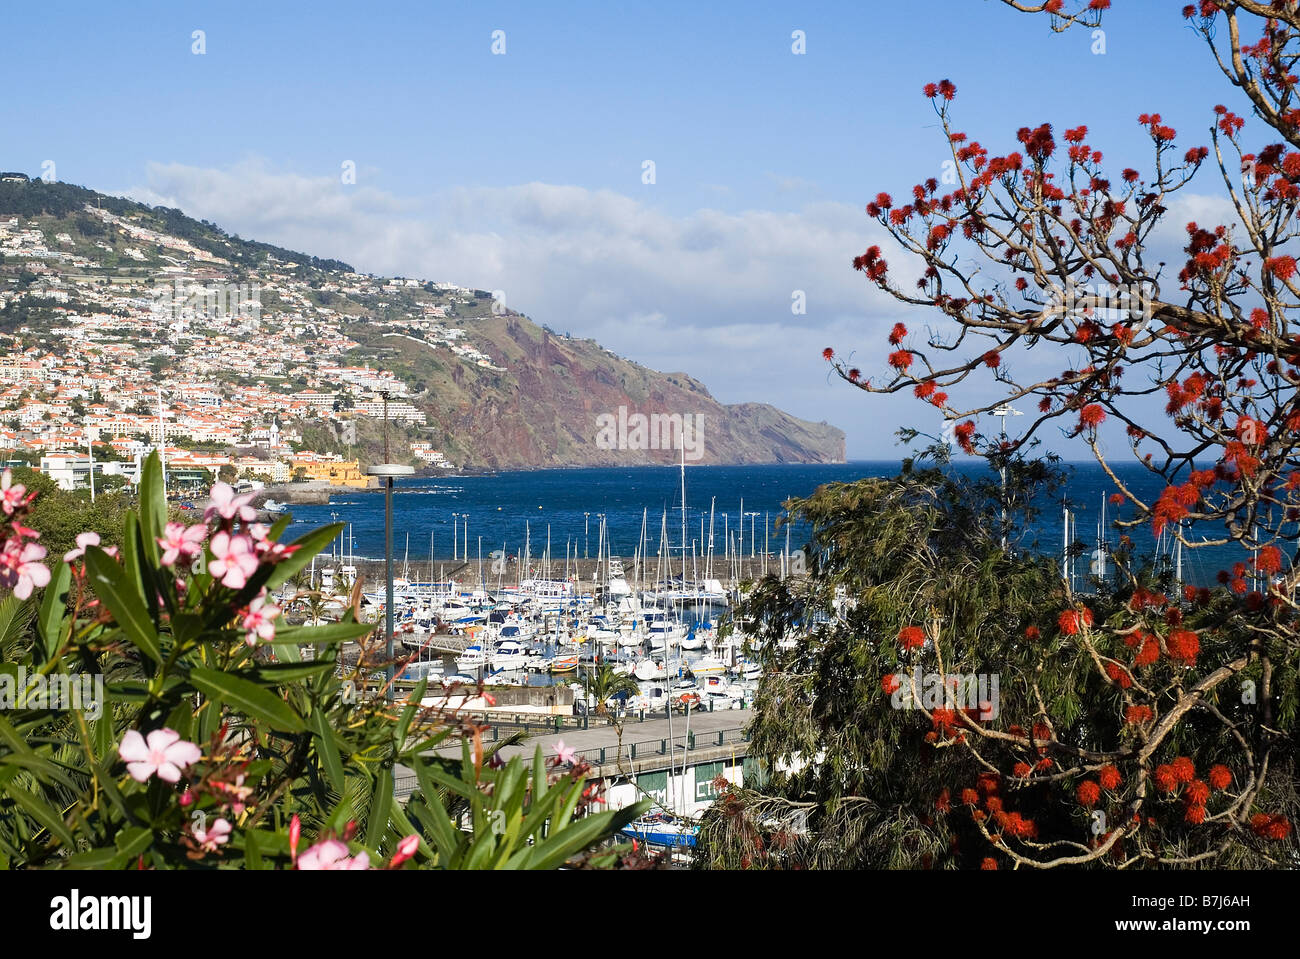 dh Parque de Santa Catarina FUNCHAL MADEIRA Marina waterfront flower plants and bay harbour view gardens Stock Photo